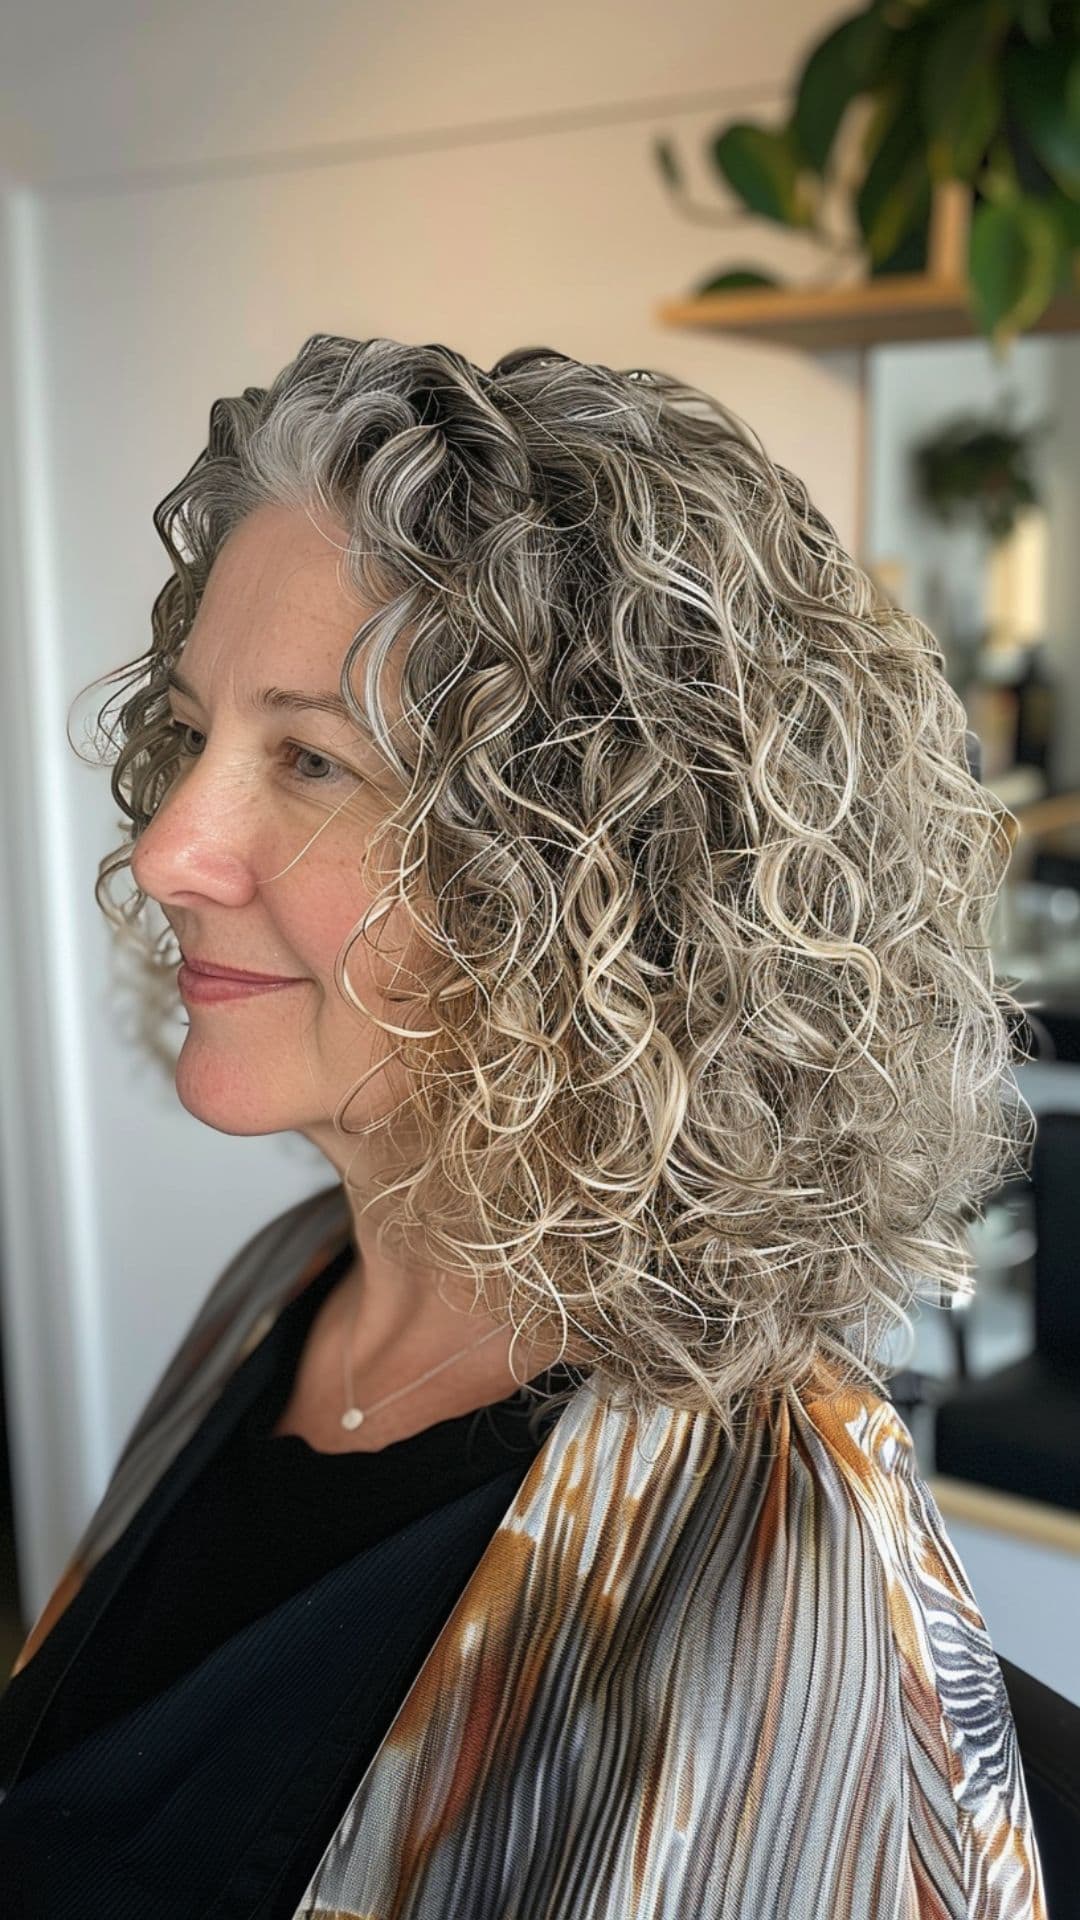 An older woman modelling a curly lob hairstyle.